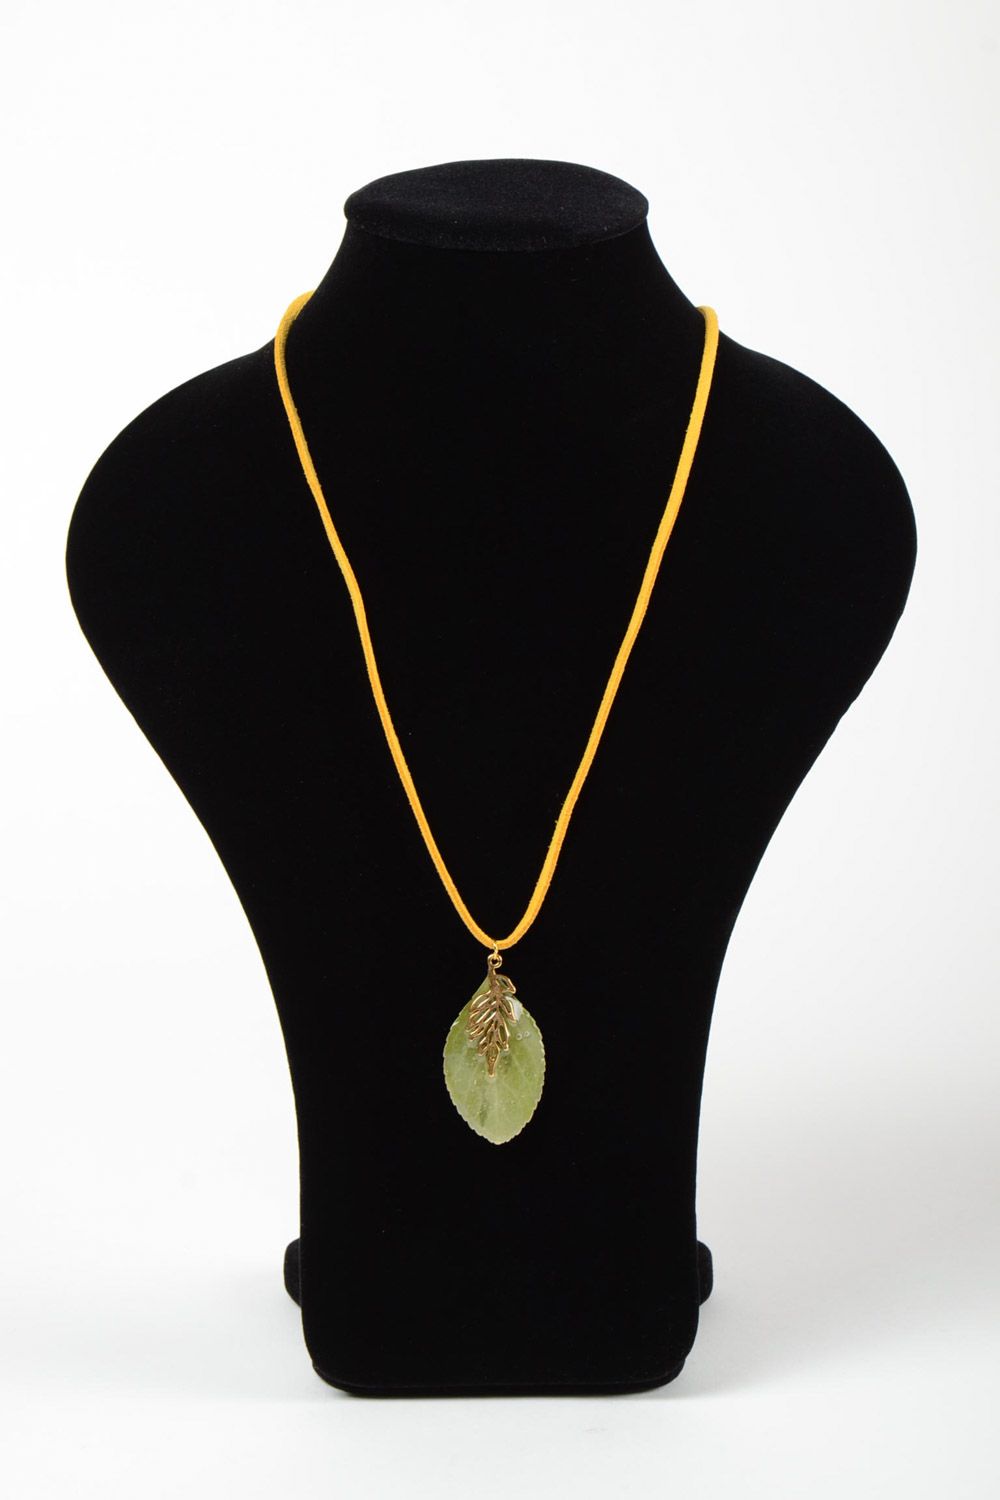 Handmade pendant with natural leaf in epoxy resin on bright suede cord photo 2